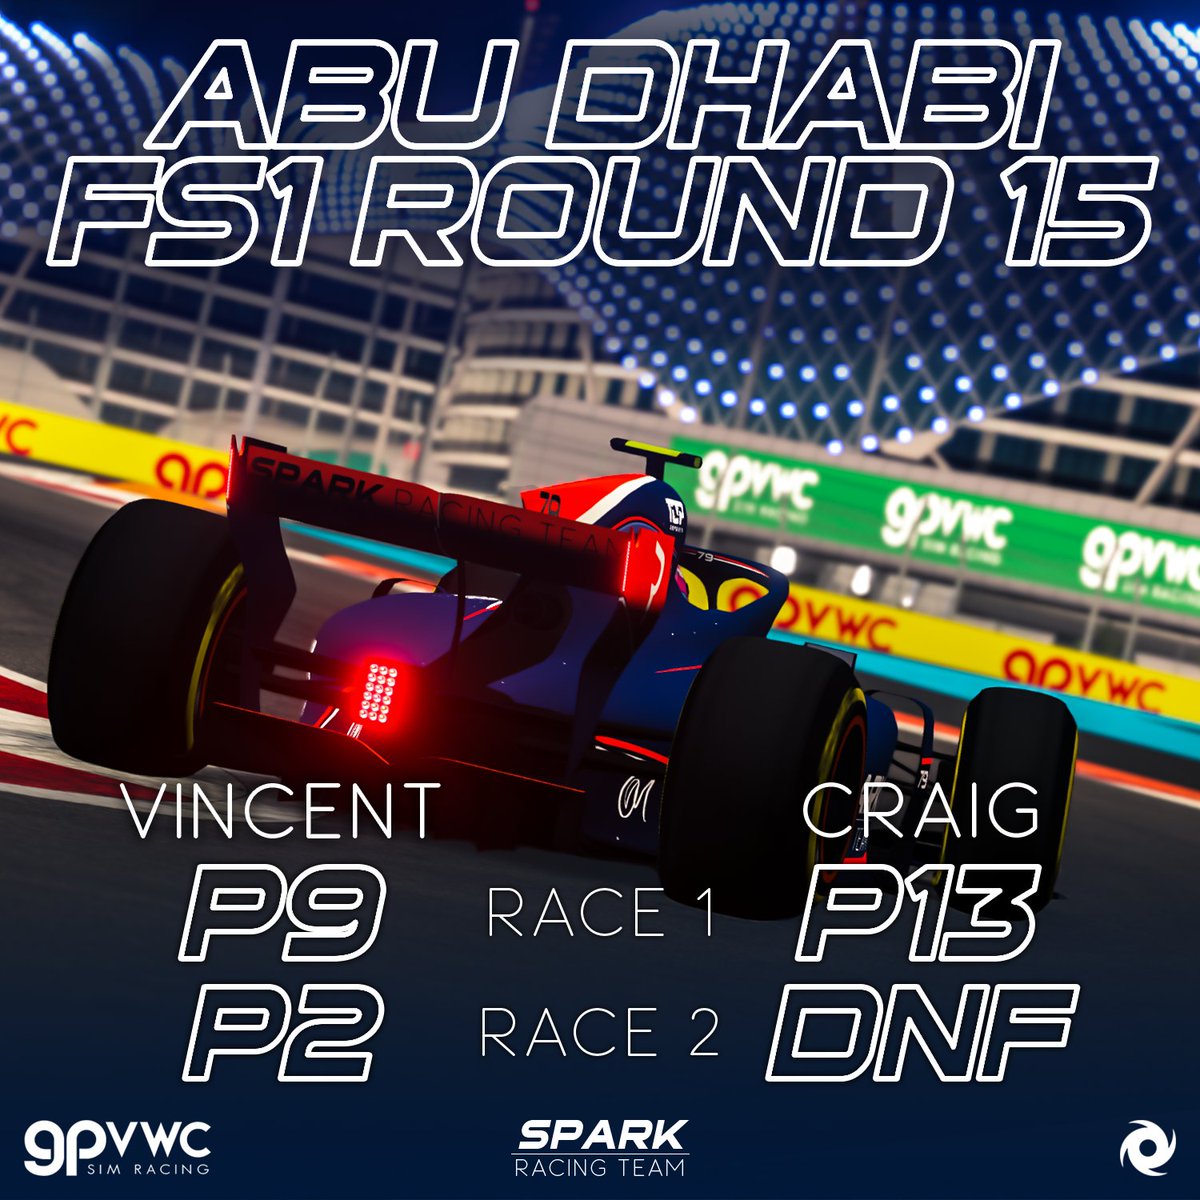 Vincent Gutt secures a strong P2 finish in Race 2, but with Craig's stroke of bad luck, the gap to Netrex is narrowing, making it a challenging task to defend our P2 position in the team rankings. #gpvwc #FS1 #simracing #racing #esports #spark #top #AbuDhabiGP